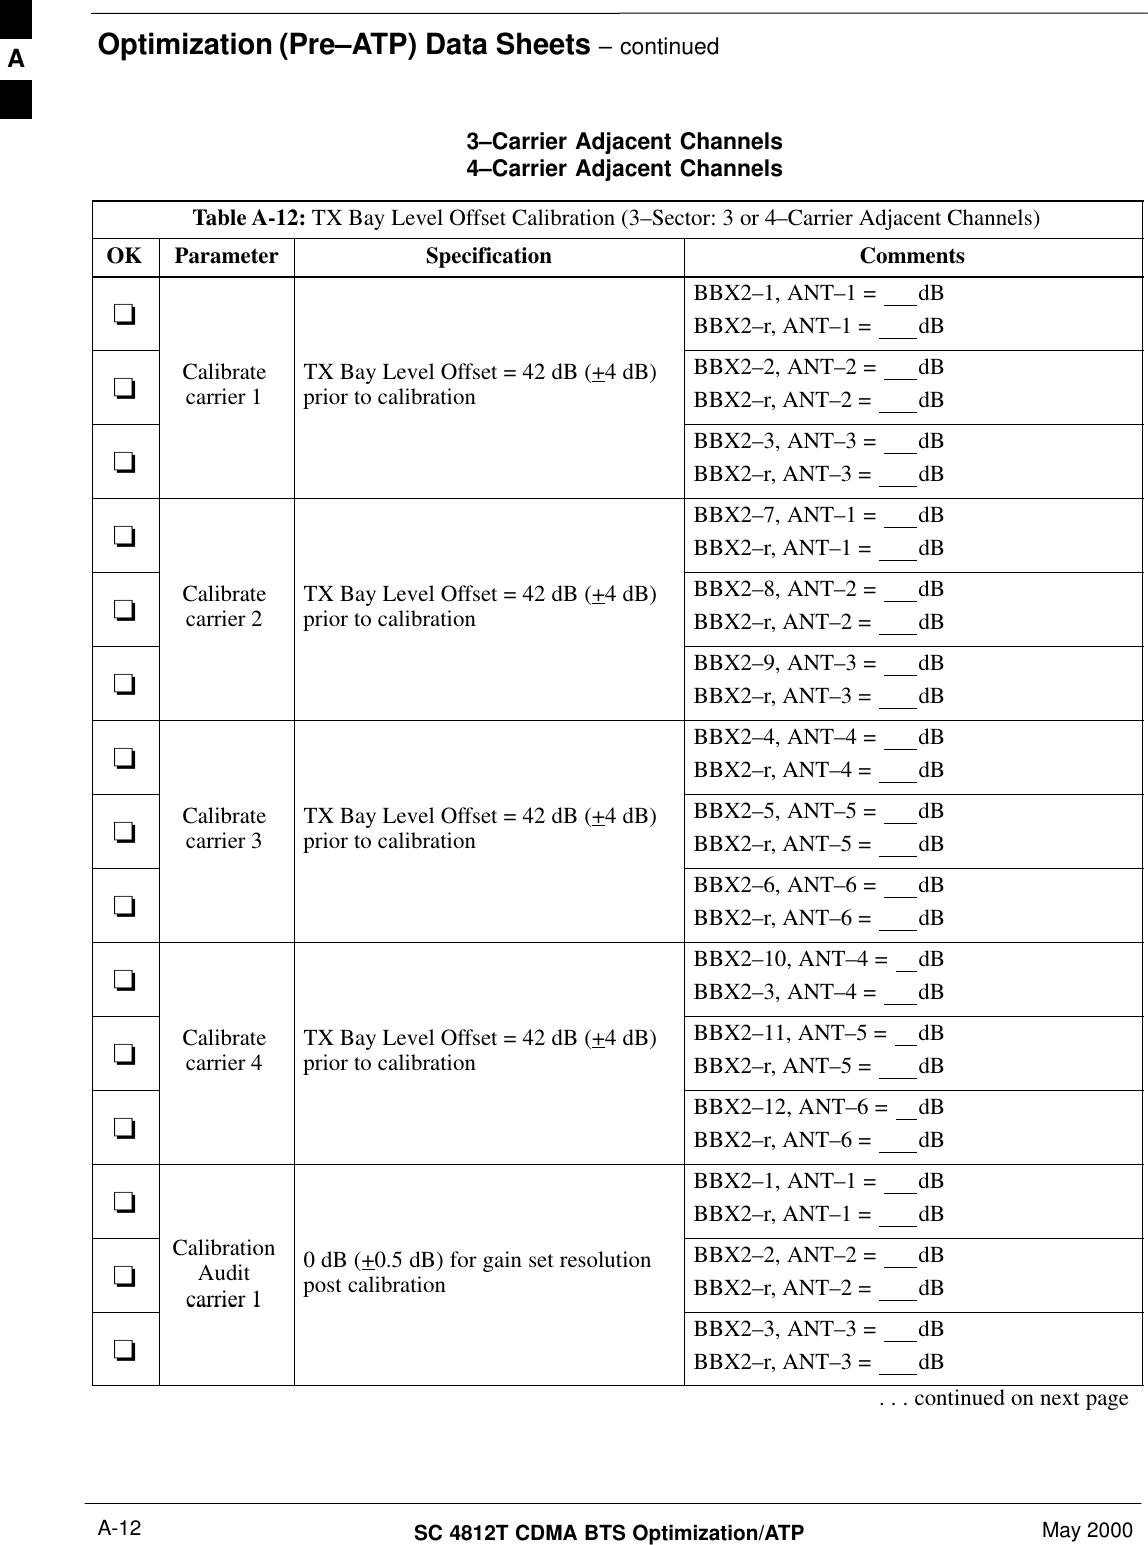 Optimization (Pre–ATP) Data Sheets – continuedSC 4812T CDMA BTS Optimization/ATP May 2000A-123–Carrier Adjacent Channels4–Carrier Adjacent ChannelsTable A-12: TX Bay Level Offset Calibration (3–Sector: 3 or 4–Carrier Adjacent Channels)OK Parameter Specification Comments-BBX2–1, ANT–1 =  dBBBX2–r, ANT–1 =  dB-Calibratecarrier 1 TX Bay Level Offset = 42 dB (+4 dB)prior to calibrationBBX2–2, ANT–2 =  dBBBX2–r, ANT–2 =  dB-BBX2–3, ANT–3 =  dBBBX2–r, ANT–3 =  dB-BBX2–7, ANT–1 =  dBBBX2–r, ANT–1 =  dB-Calibratecarrier 2 TX Bay Level Offset = 42 dB (+4 dB)prior to calibrationBBX2–8, ANT–2 =  dBBBX2–r, ANT–2 =  dB-BBX2–9, ANT–3 =  dBBBX2–r, ANT–3 =  dB-BBX2–4, ANT–4 =  dBBBX2–r, ANT–4 =  dB-Calibratecarrier 3 TX Bay Level Offset = 42 dB (+4 dB)prior to calibrationBBX2–5, ANT–5 =  dBBBX2–r, ANT–5 =  dB-BBX2–6, ANT–6 =  dBBBX2–r, ANT–6 =  dB-BBX2–10, ANT–4 =  dBBBX2–3, ANT–4 =  dB-Calibratecarrier 4 TX Bay Level Offset = 42 dB (+4 dB)prior to calibrationBBX2–11, ANT–5 =  dBBBX2–r, ANT–5 =  dB-BBX2–12, ANT–6 =  dBBBX2–r, ANT–6 =  dB-BBX2–1, ANT–1 =  dBBBX2–r, ANT–1 =  dB-CalibrationAuditcarrier 10 dB (+0.5 dB) for gain set resolutionpost calibrationBBX2–2, ANT–2 =  dBBBX2–r, ANT–2 =  dB-carrier 1BBX2–3, ANT–3 =  dBBBX2–r, ANT–3 =  dB. . . continued on next pageA